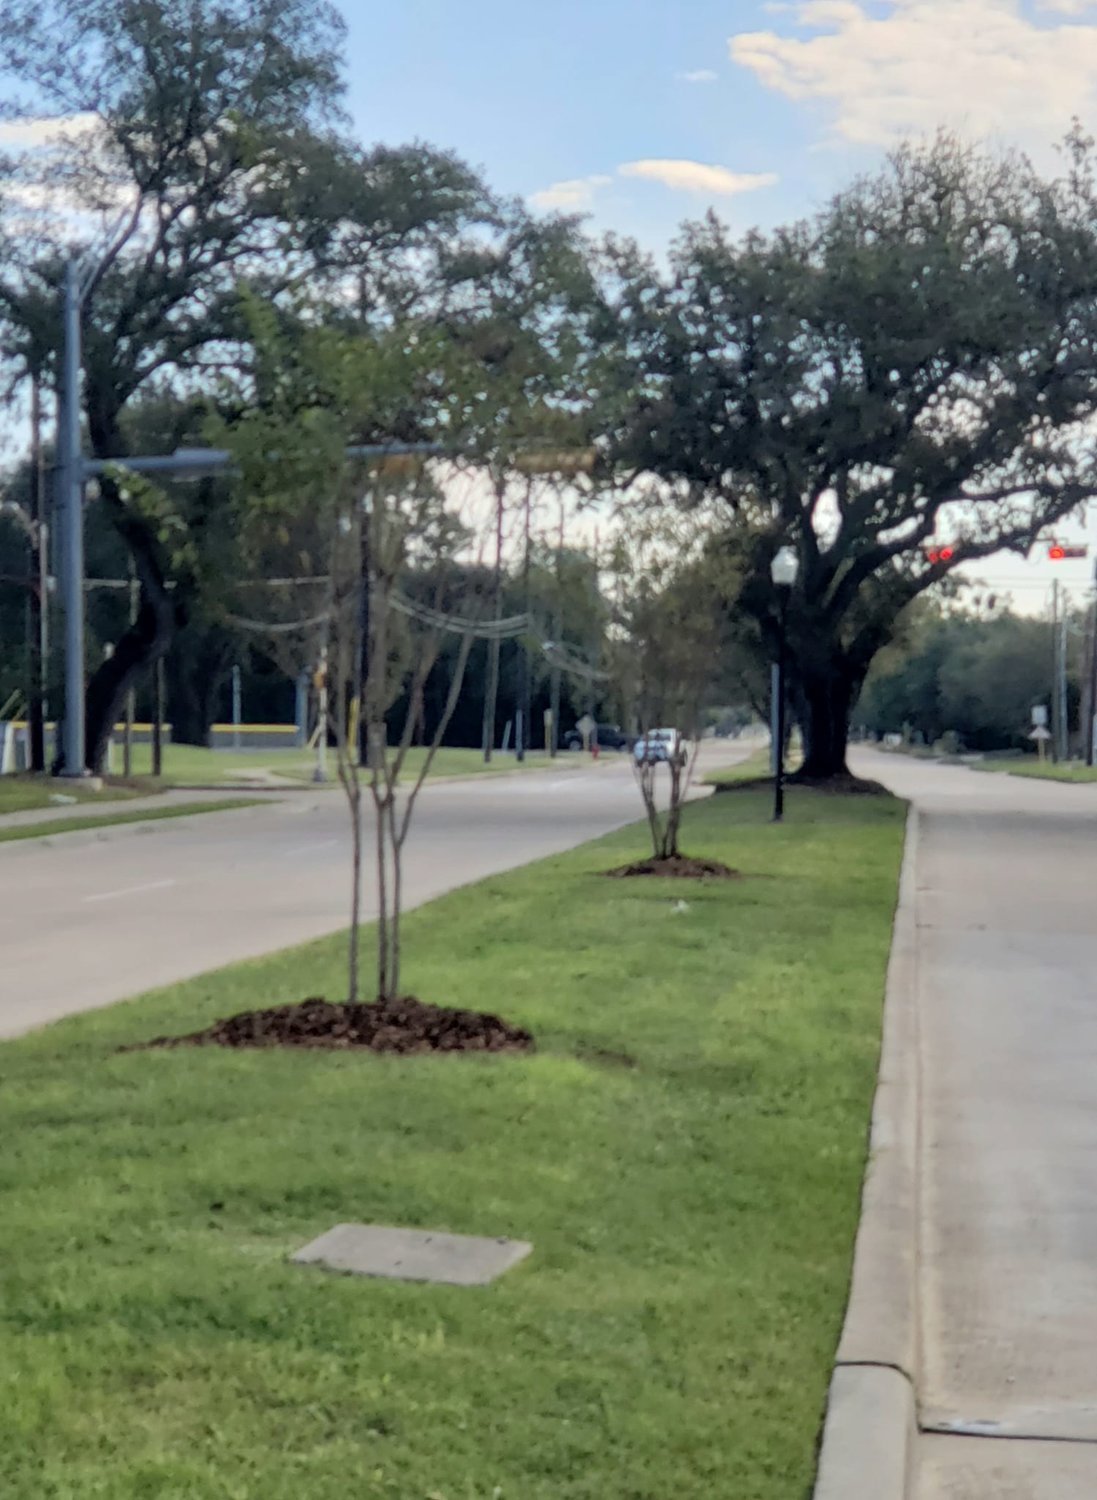 Keep Katy Beautiful last month planted 20 trees along Franz Road as part of the Franz Road Beautification Project.